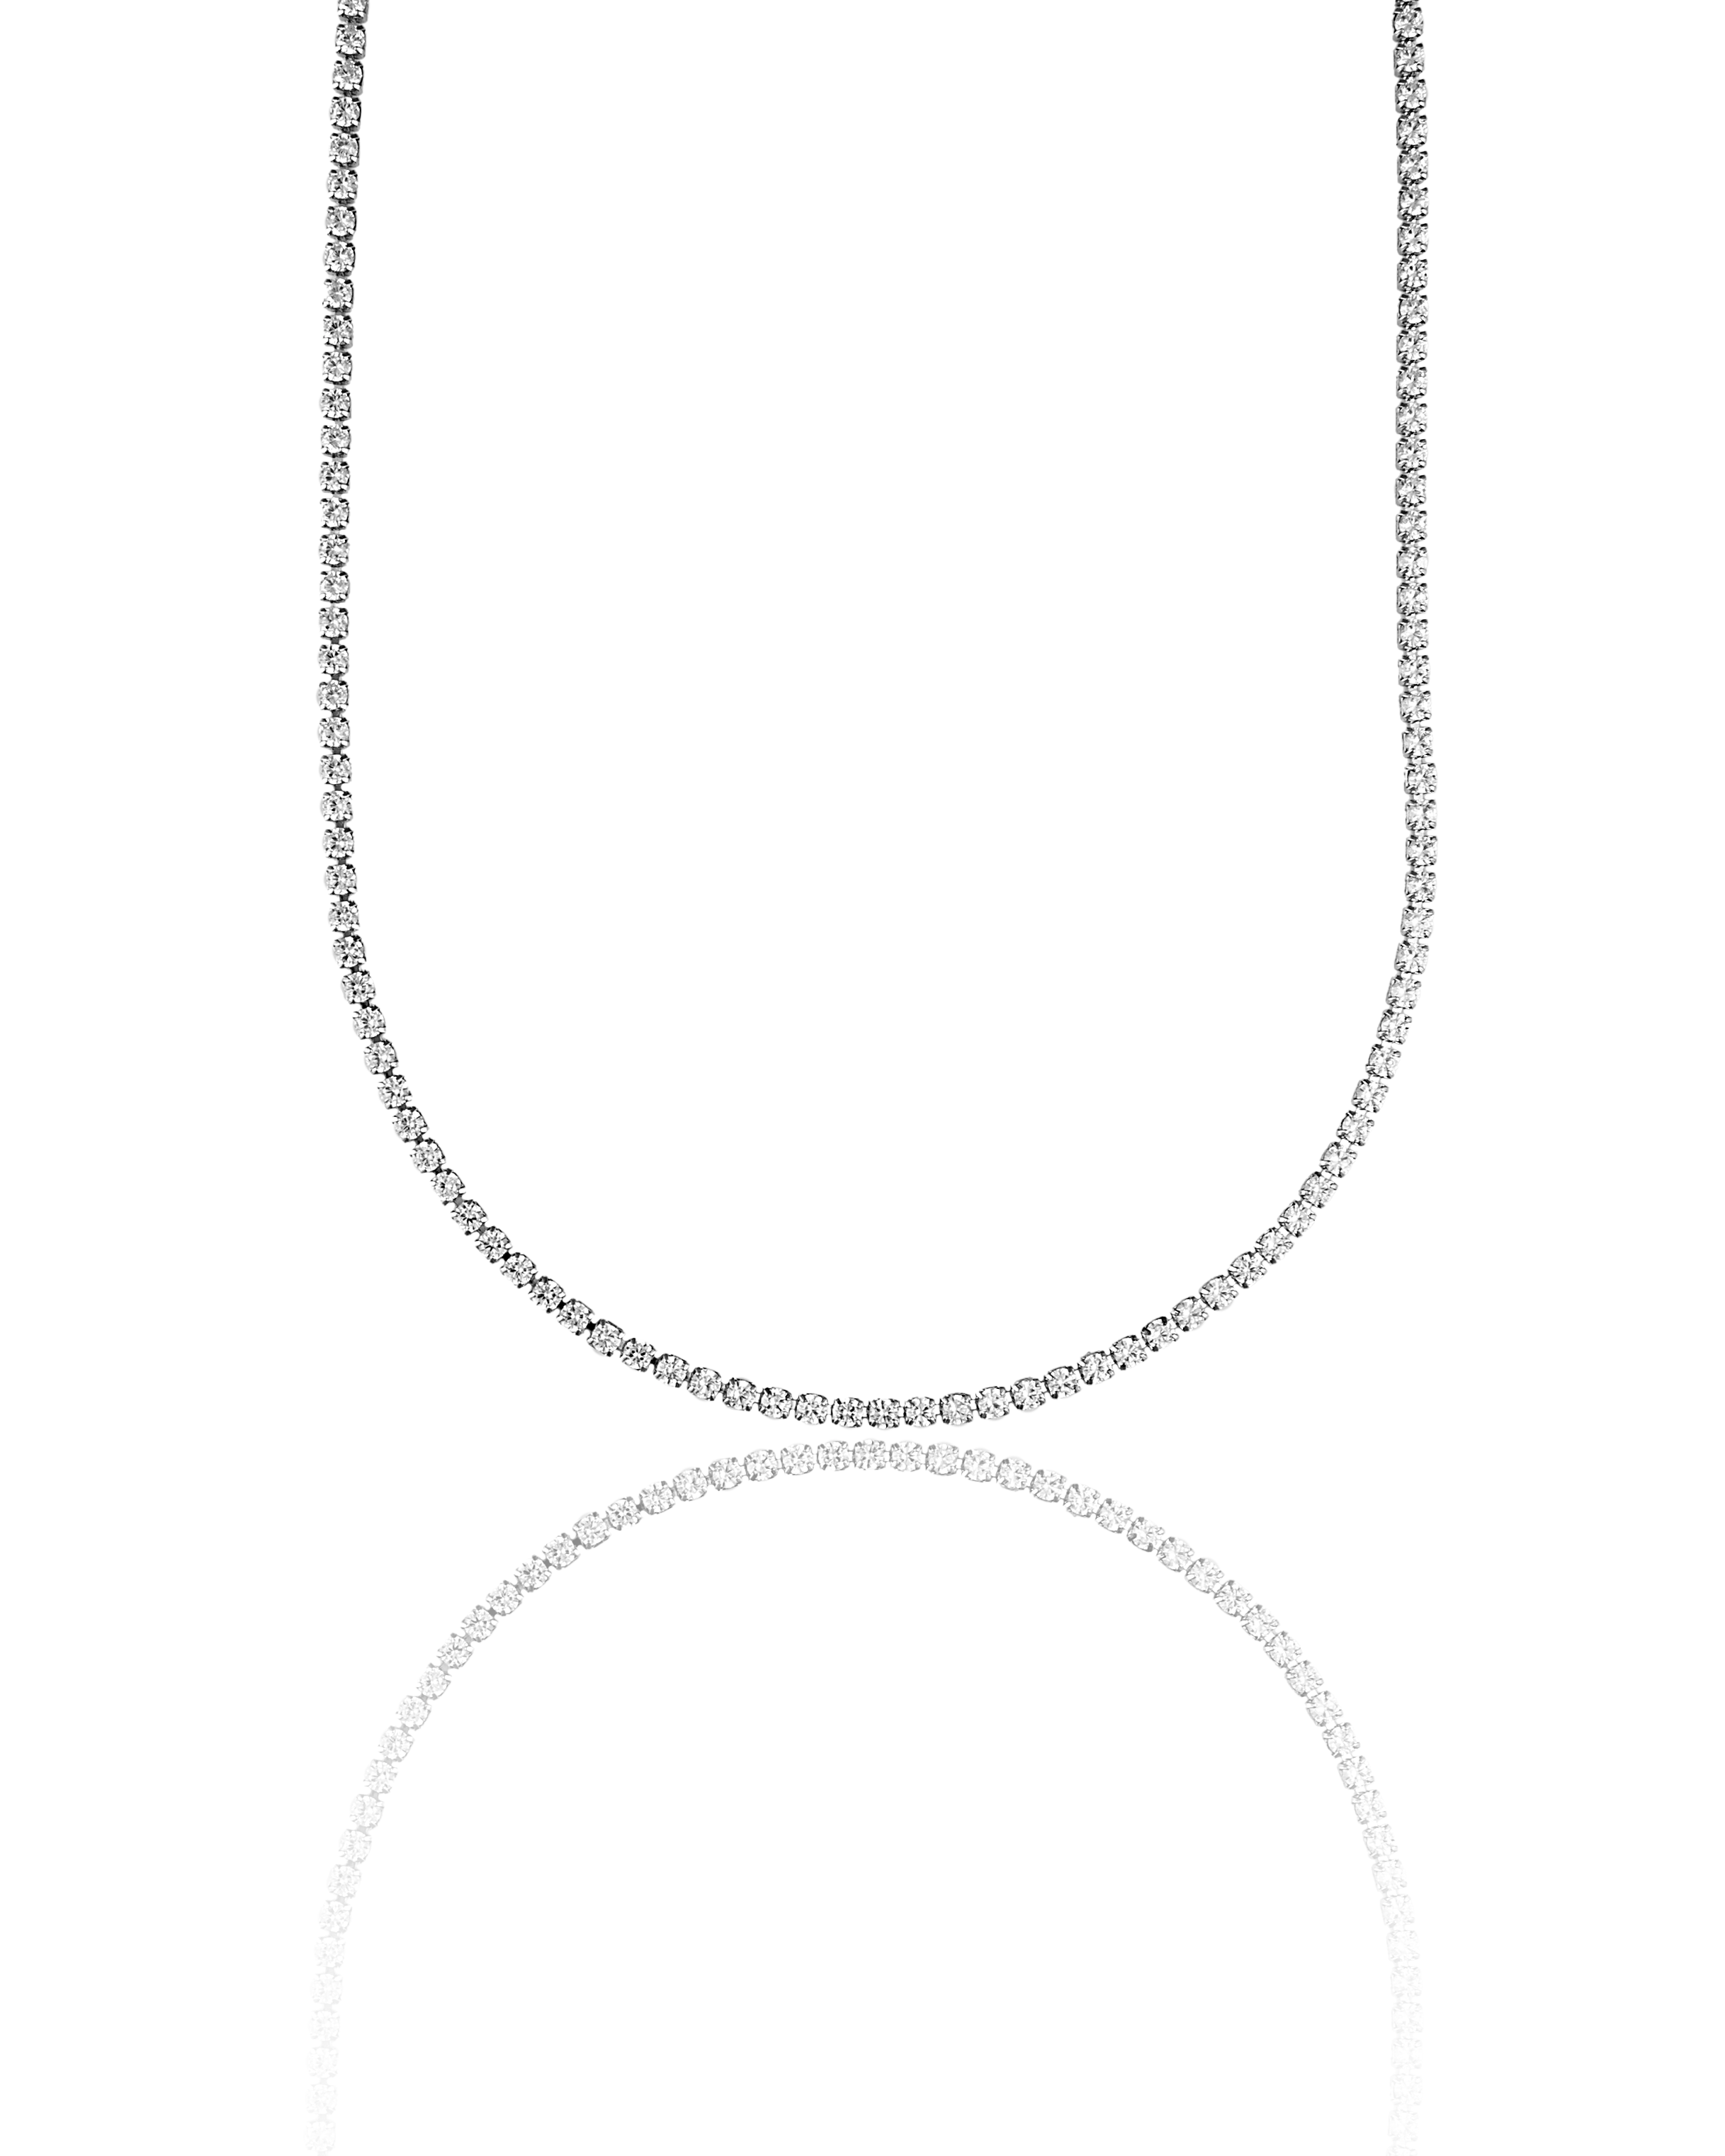 2mm Tennis Necklace Choker With Round Clear Cubic Zirconia Stones (F210)